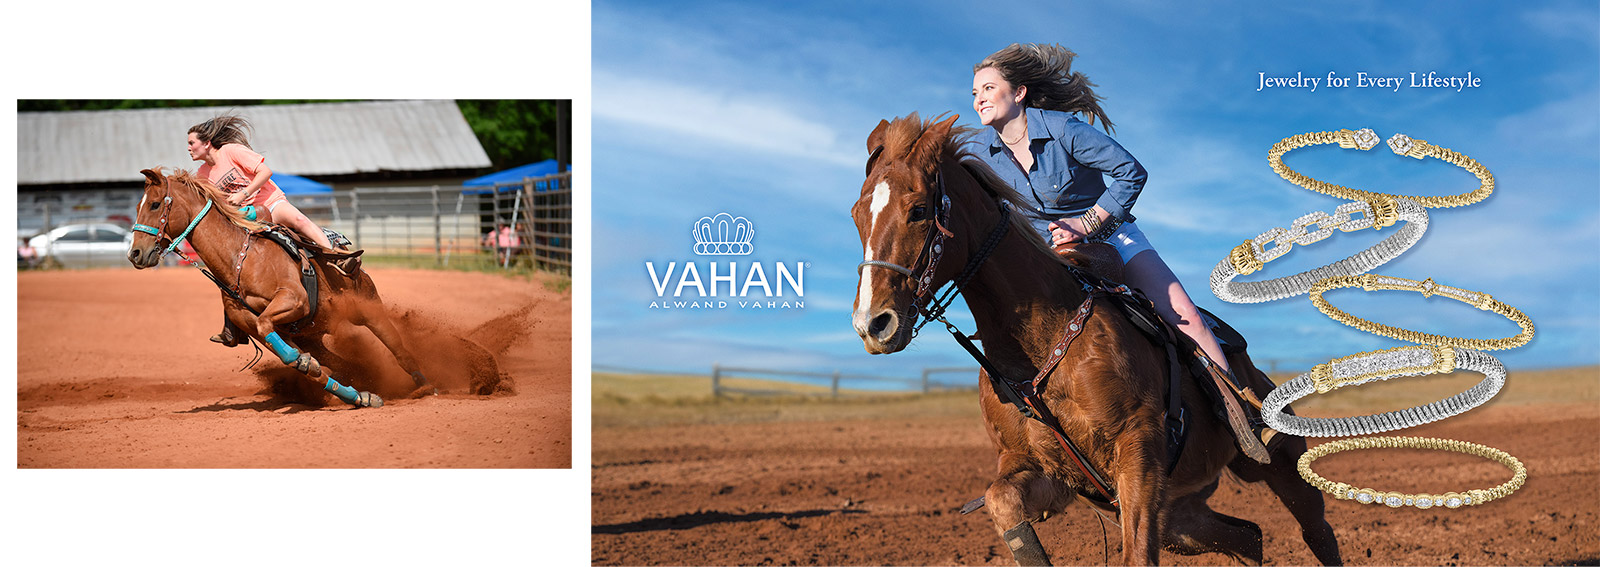 Vahan horse photo and advertisement